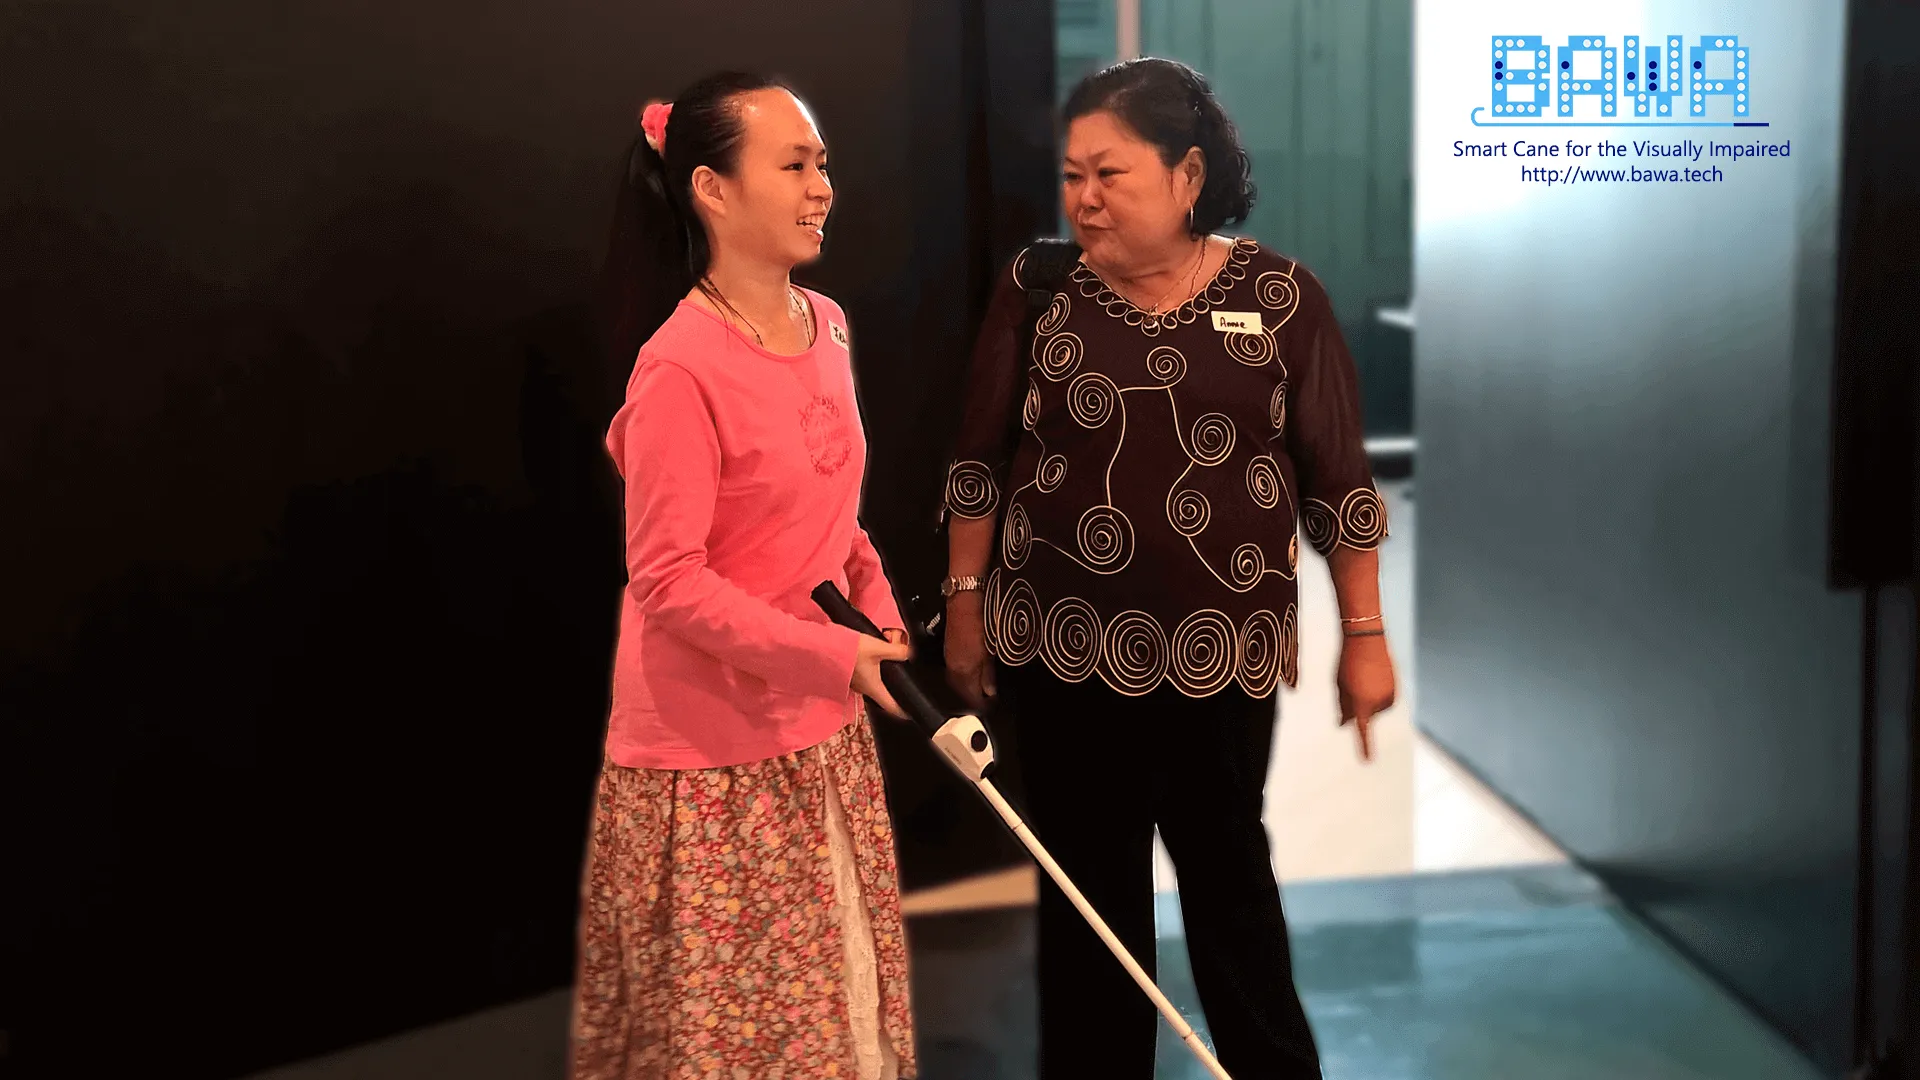 Felicia (born blind), accompanied by Annie Soon (Orientation and Mobility Specialist), experiencing the BAWA Cane.